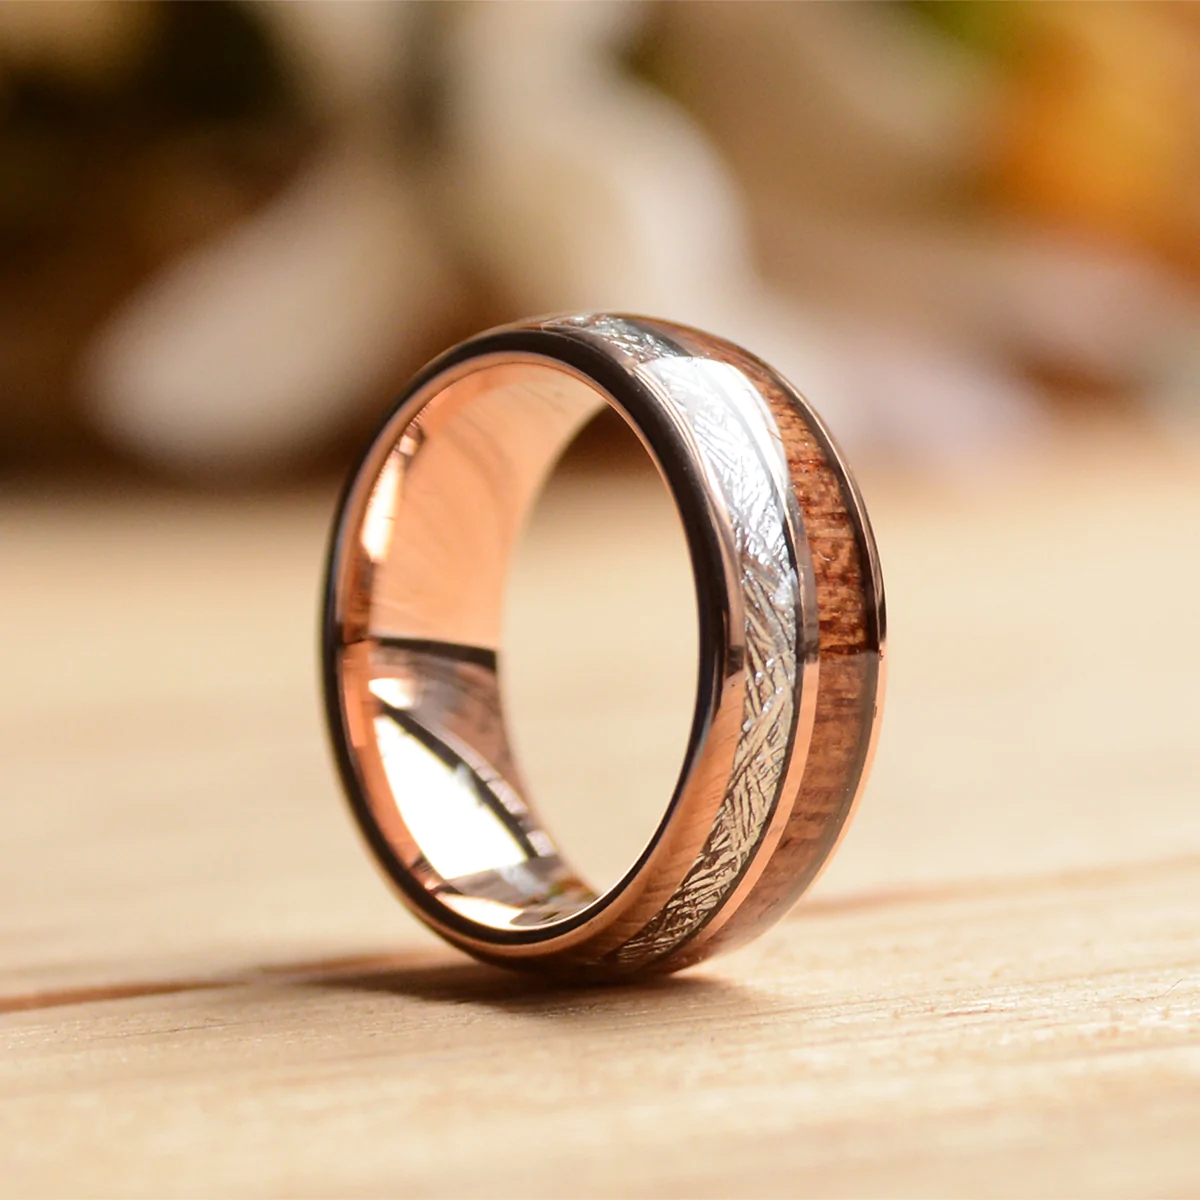 The best alternative for enthusiasts of black wedding bands